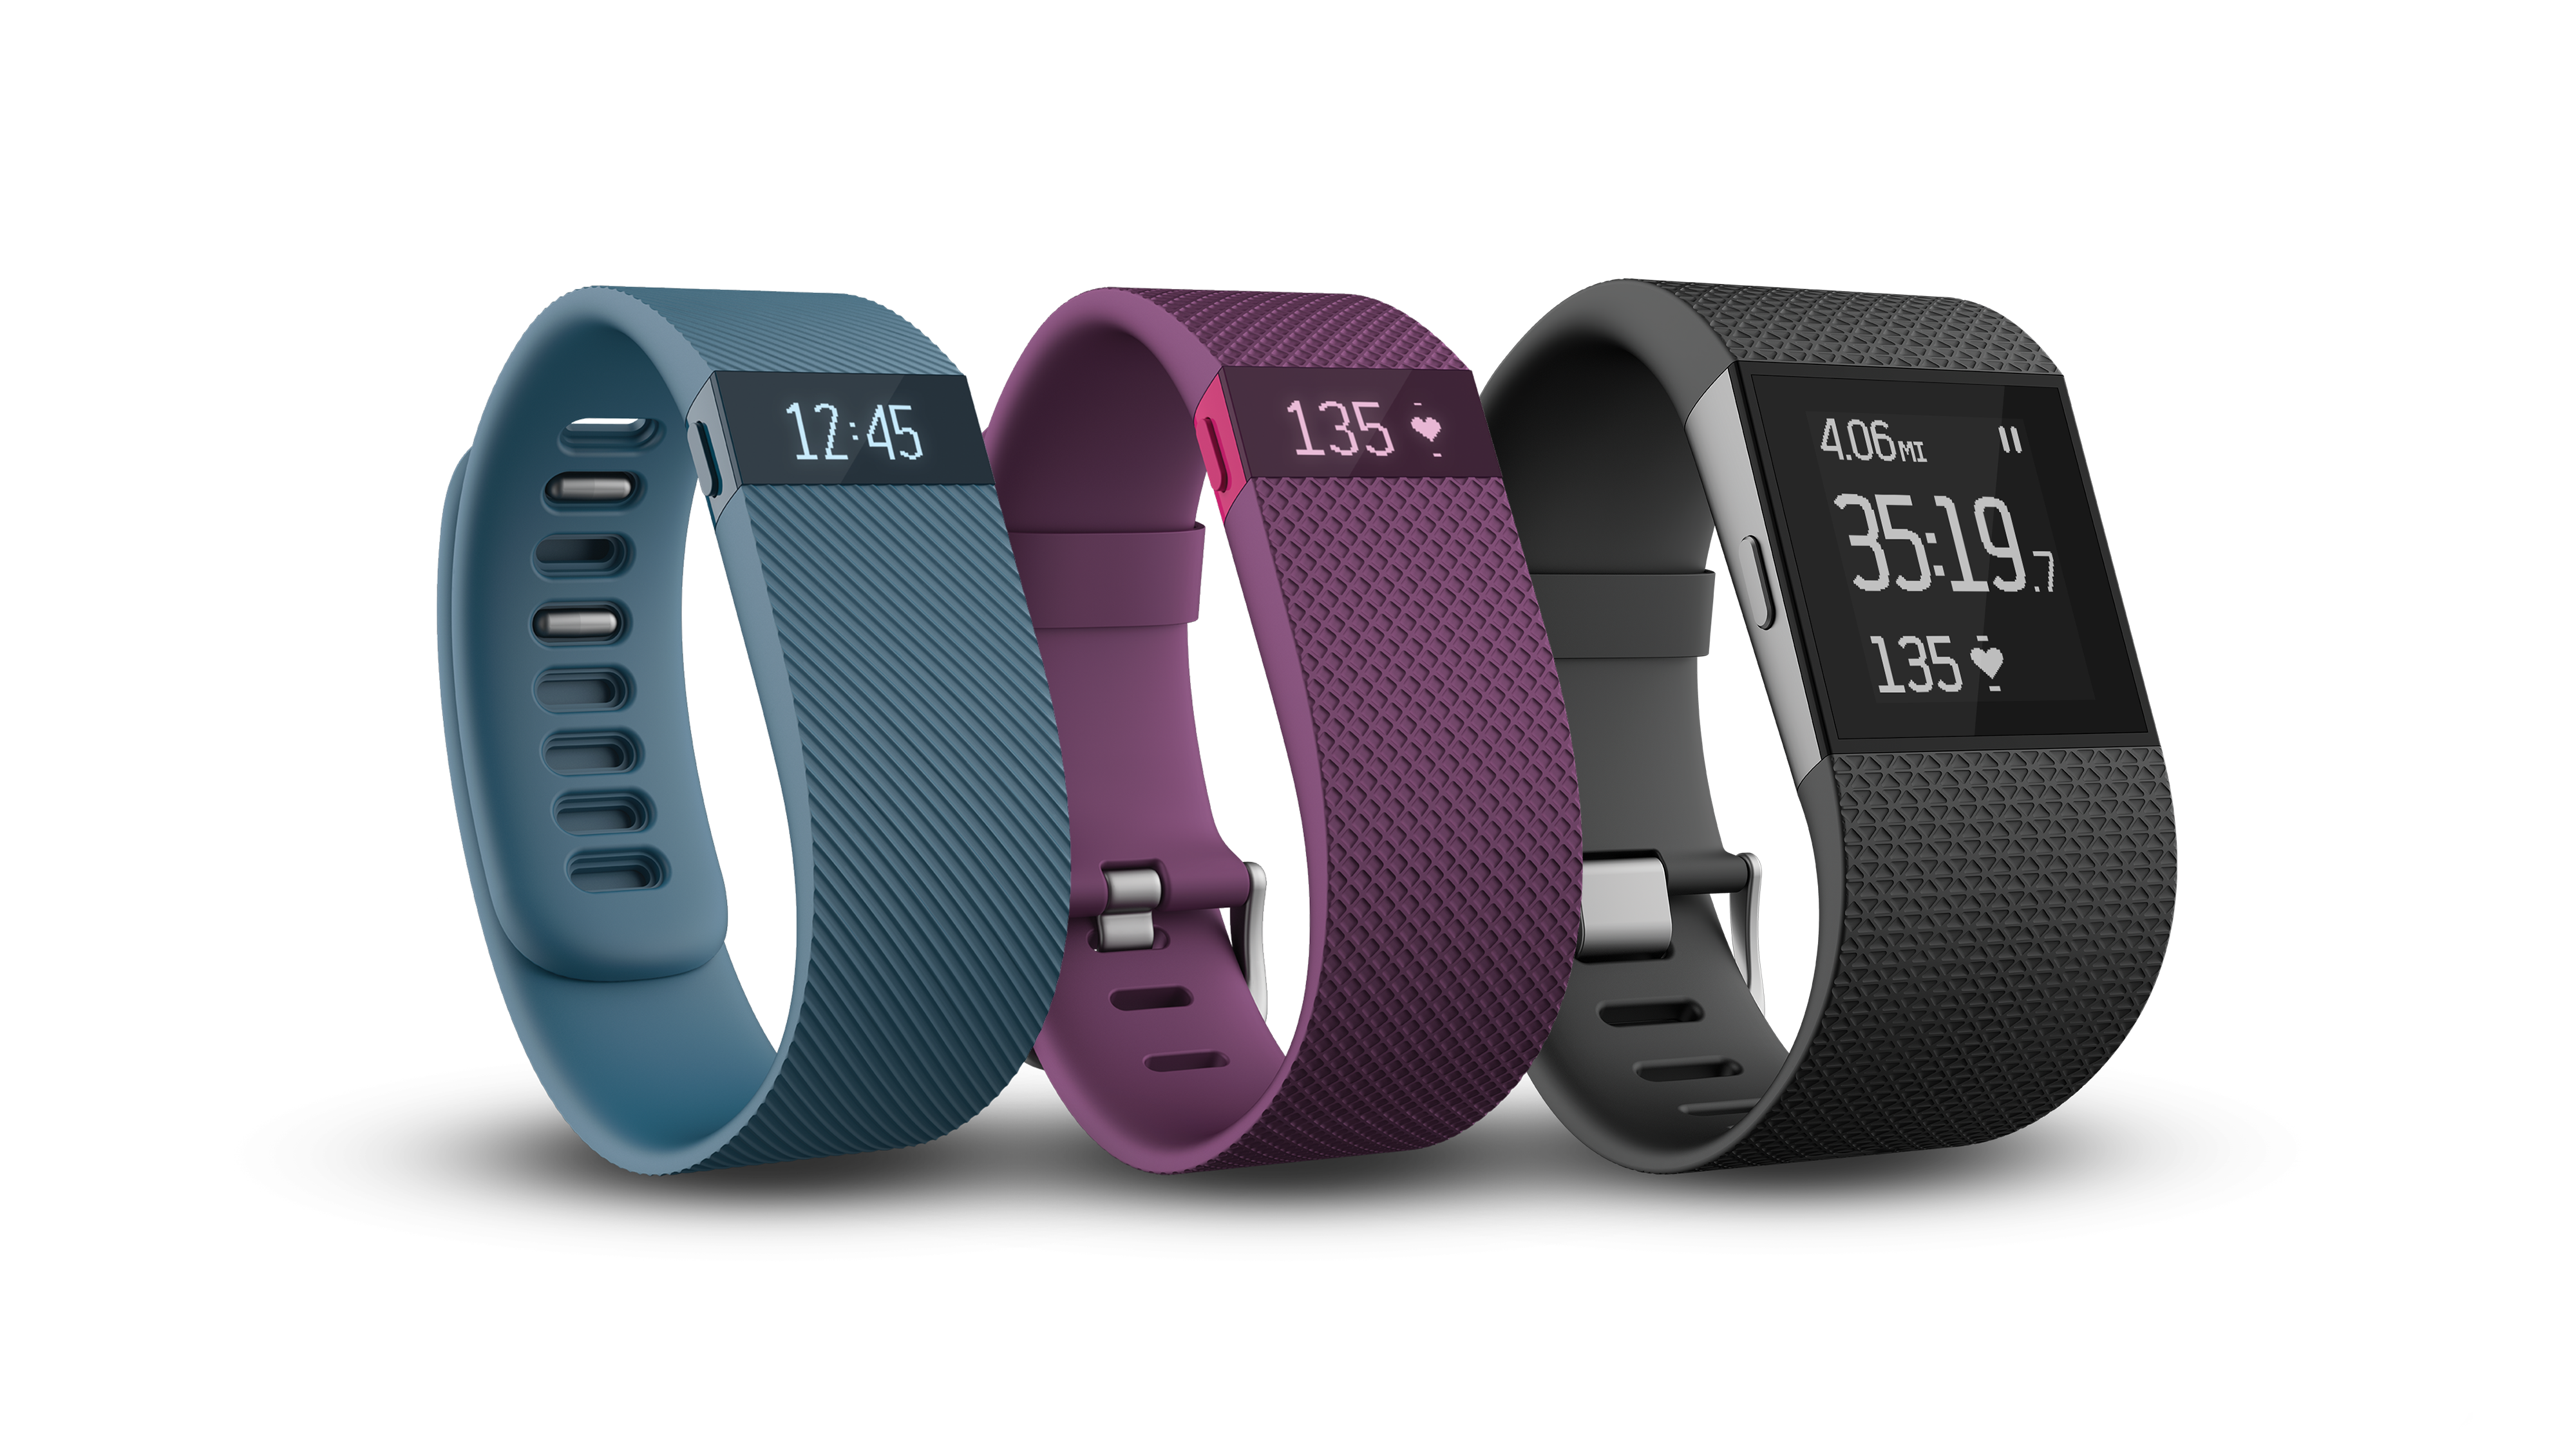 Fitbit lineup